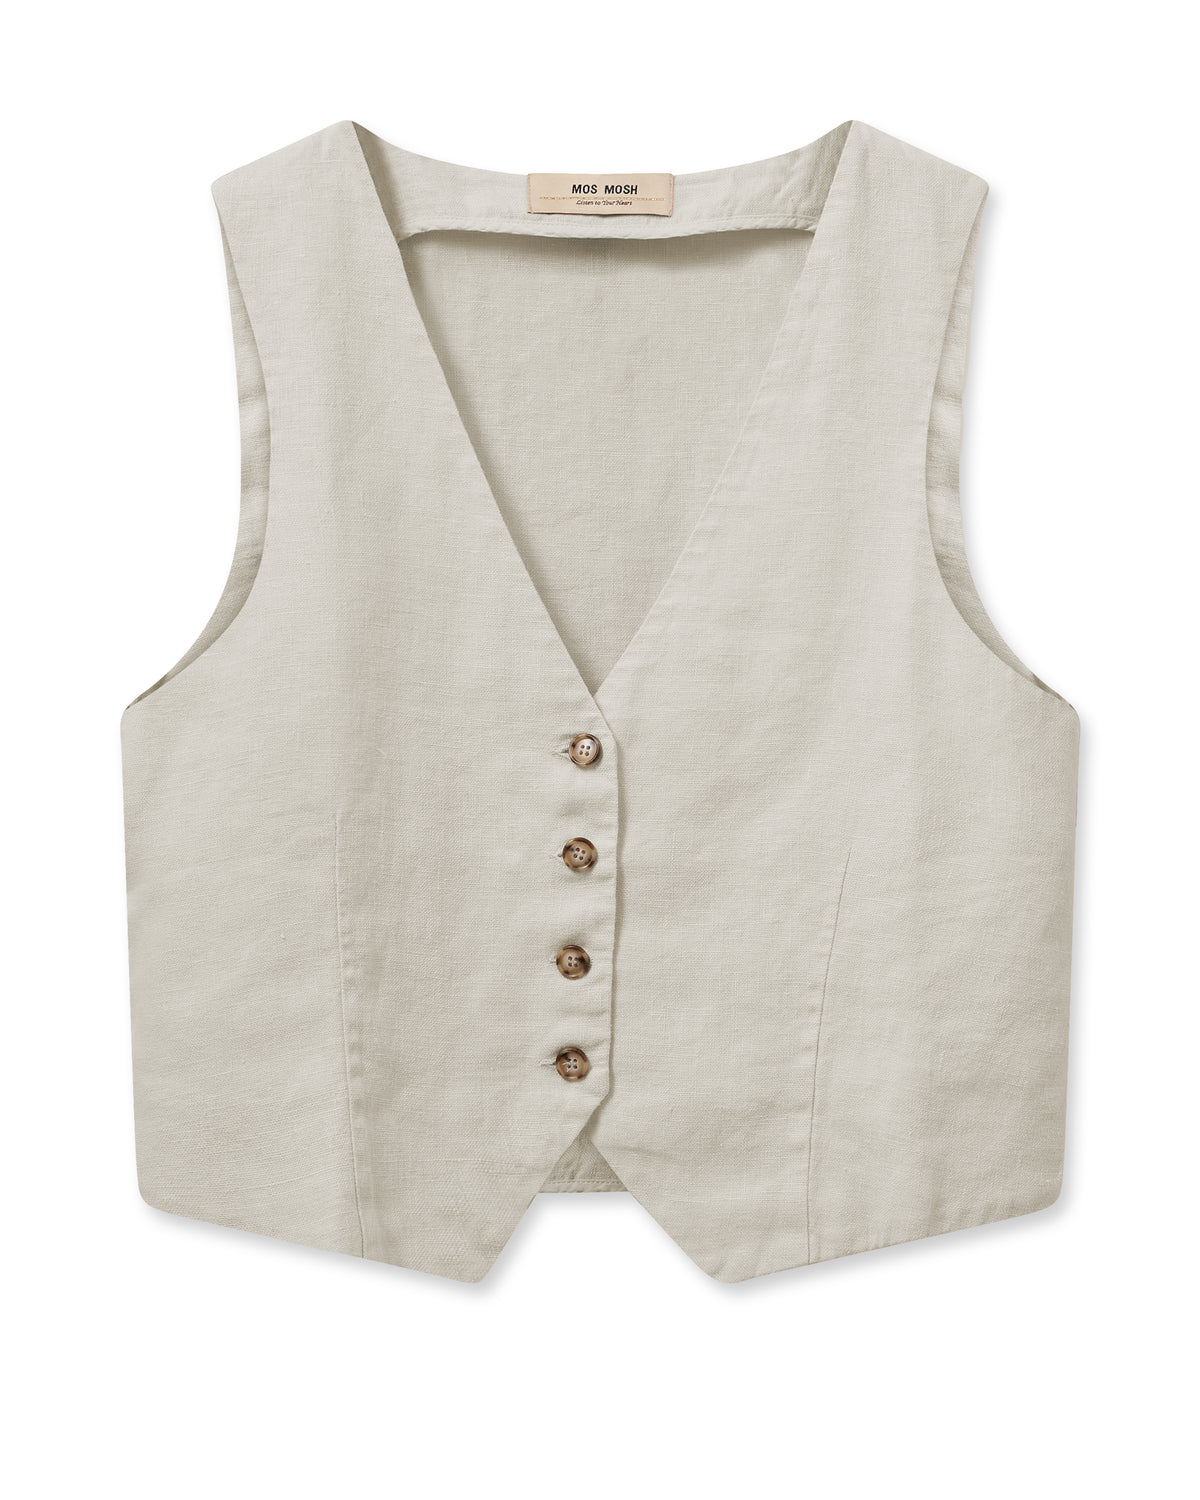 Ecru stone linen single breasted waistcoat with contrast buttons